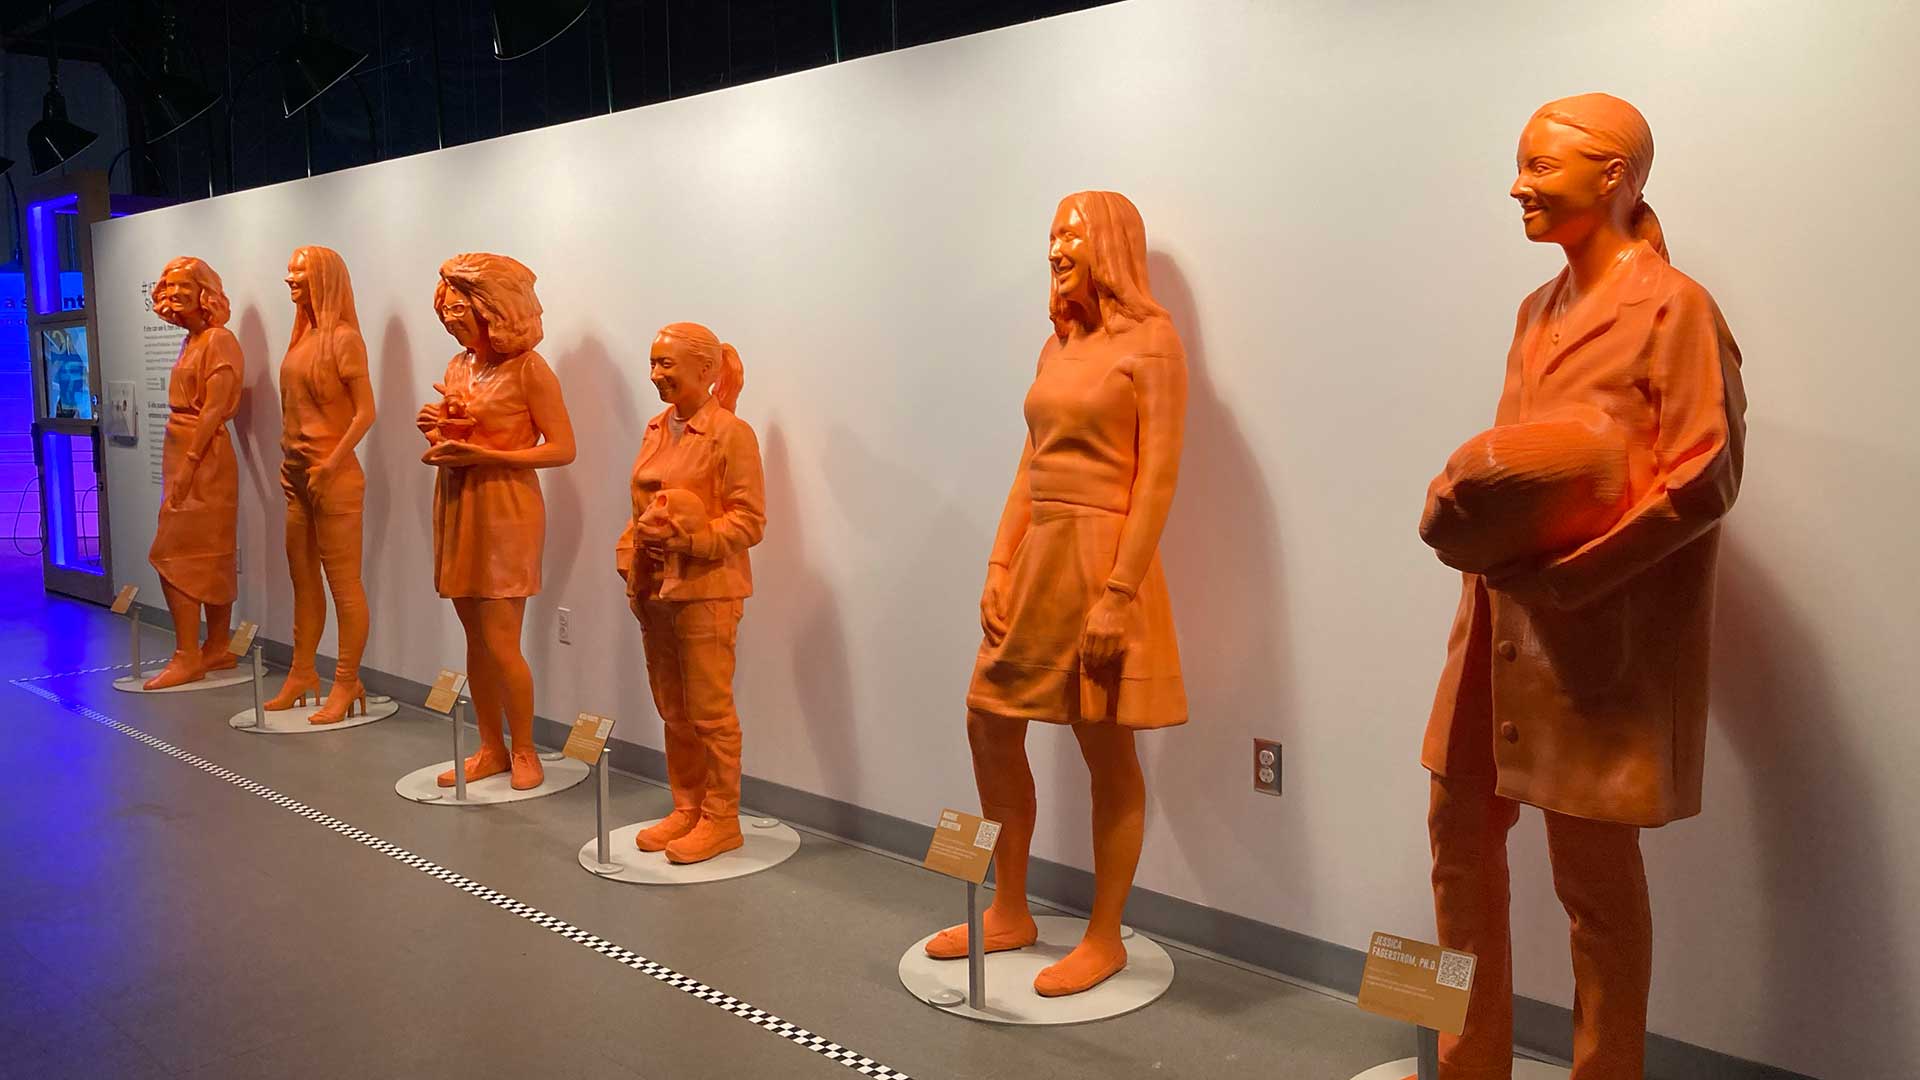 Orange statues in a row